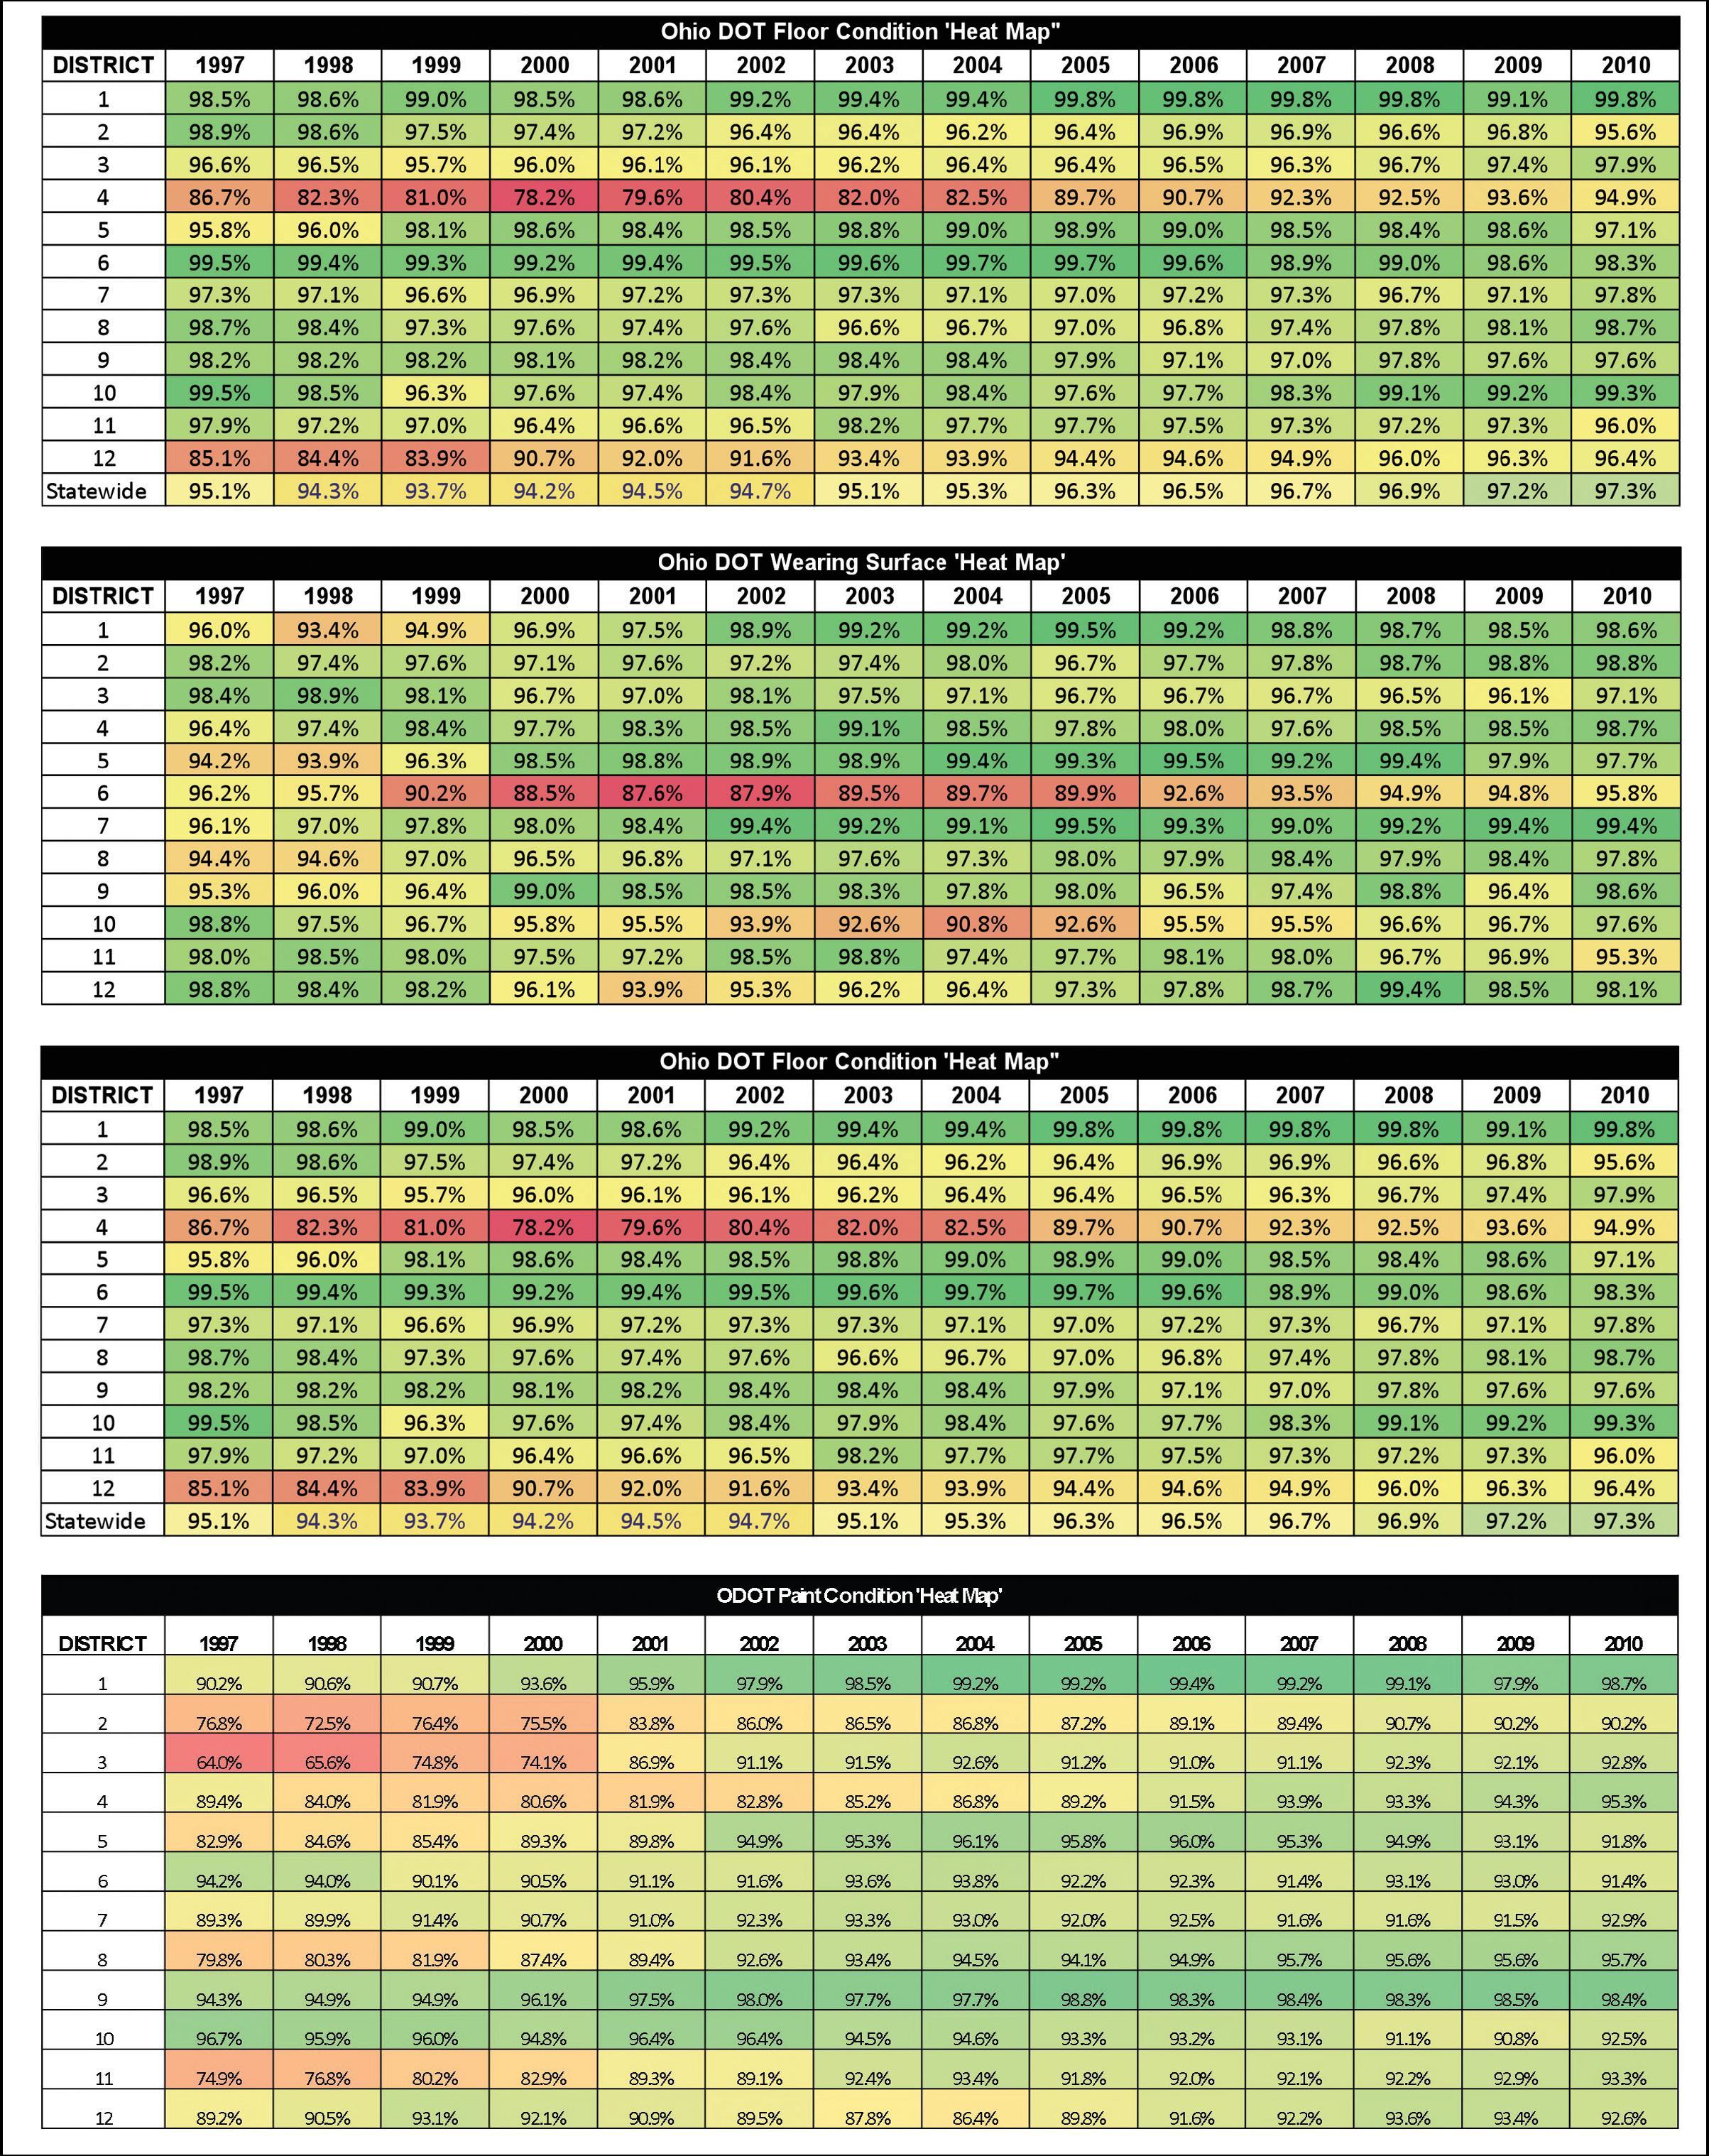 Figure 42 is a complex table that represents a "heat map" of conditions among the 12 ODOT districts. The table illustrates conditions from 1997 through 2010 for each of the 12 ODOT districts in four categories, bridge general appraisal, bridge wearing surfaces, bridge floor conditions and bridge paint conditions.  A cell exists for each of the four categories of conditions for each district each year. The cells are color coated with cool colors such as green indicating cells where districts met or exceeded the condition targets. The cells are coded in hot colors of yellow and red where conditions are at or below target. The overall picture that the heat maps present is a color-coded depiction of the trend that bridge conditions steadily improved in all the categories from 1997 to 2010. The colors shift from many hot colors indicating that many categories were at or below target in the 1990s to illustrating that nearly all targets were met by 2010.